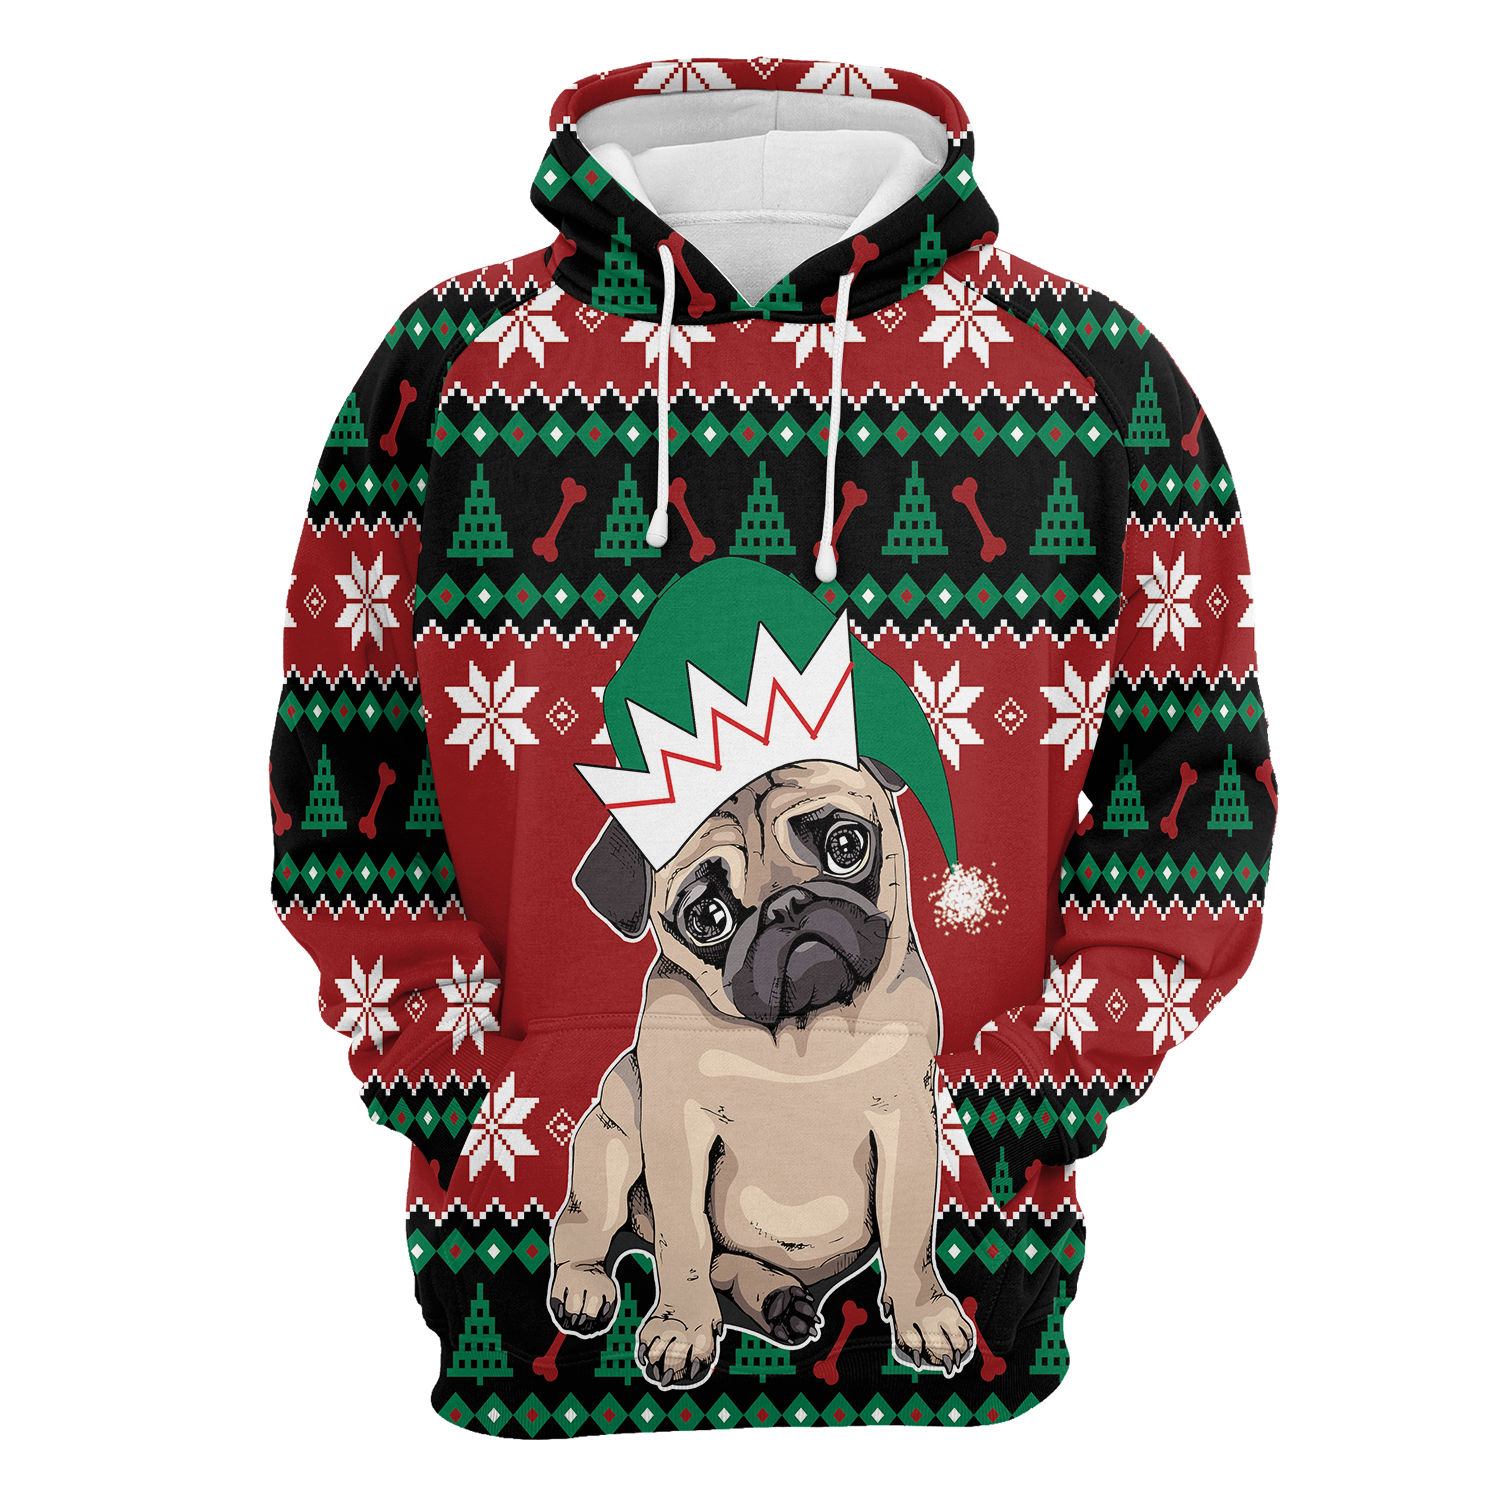 Pug Christmas Pattern Pullover Premium Hoodie, Perfect Outfit For Men And Women On Christmas New Year Autumn Winter